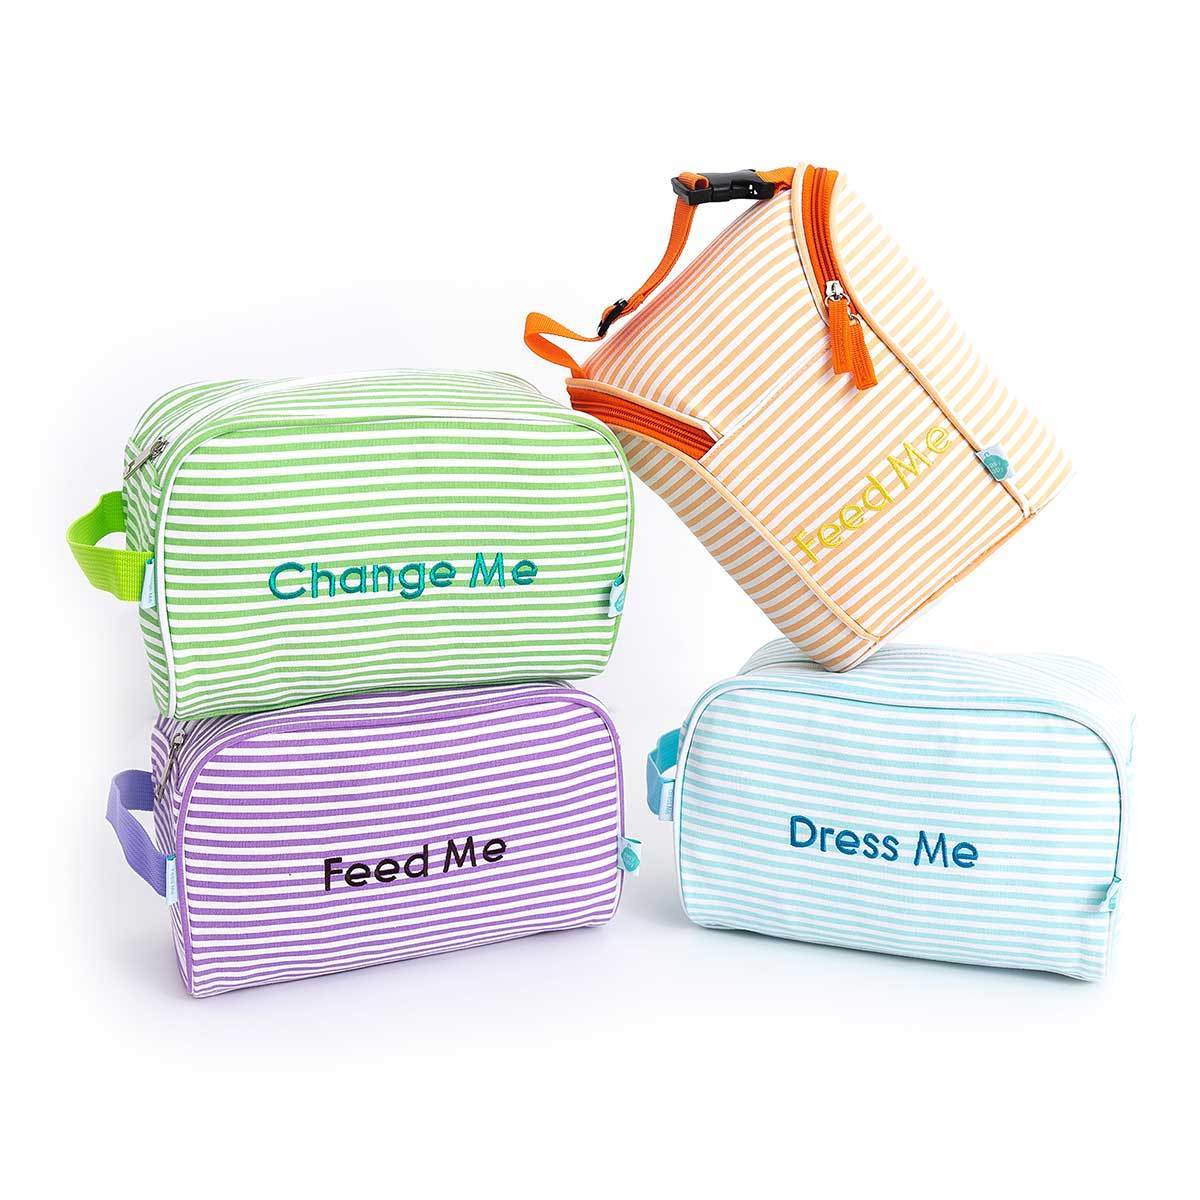 Mother Load - Diaper Bag Organizing Pouches, Small Organizing Bags, 5-Piece Multicolored Set of Embroidered Diaper Bag Pouches